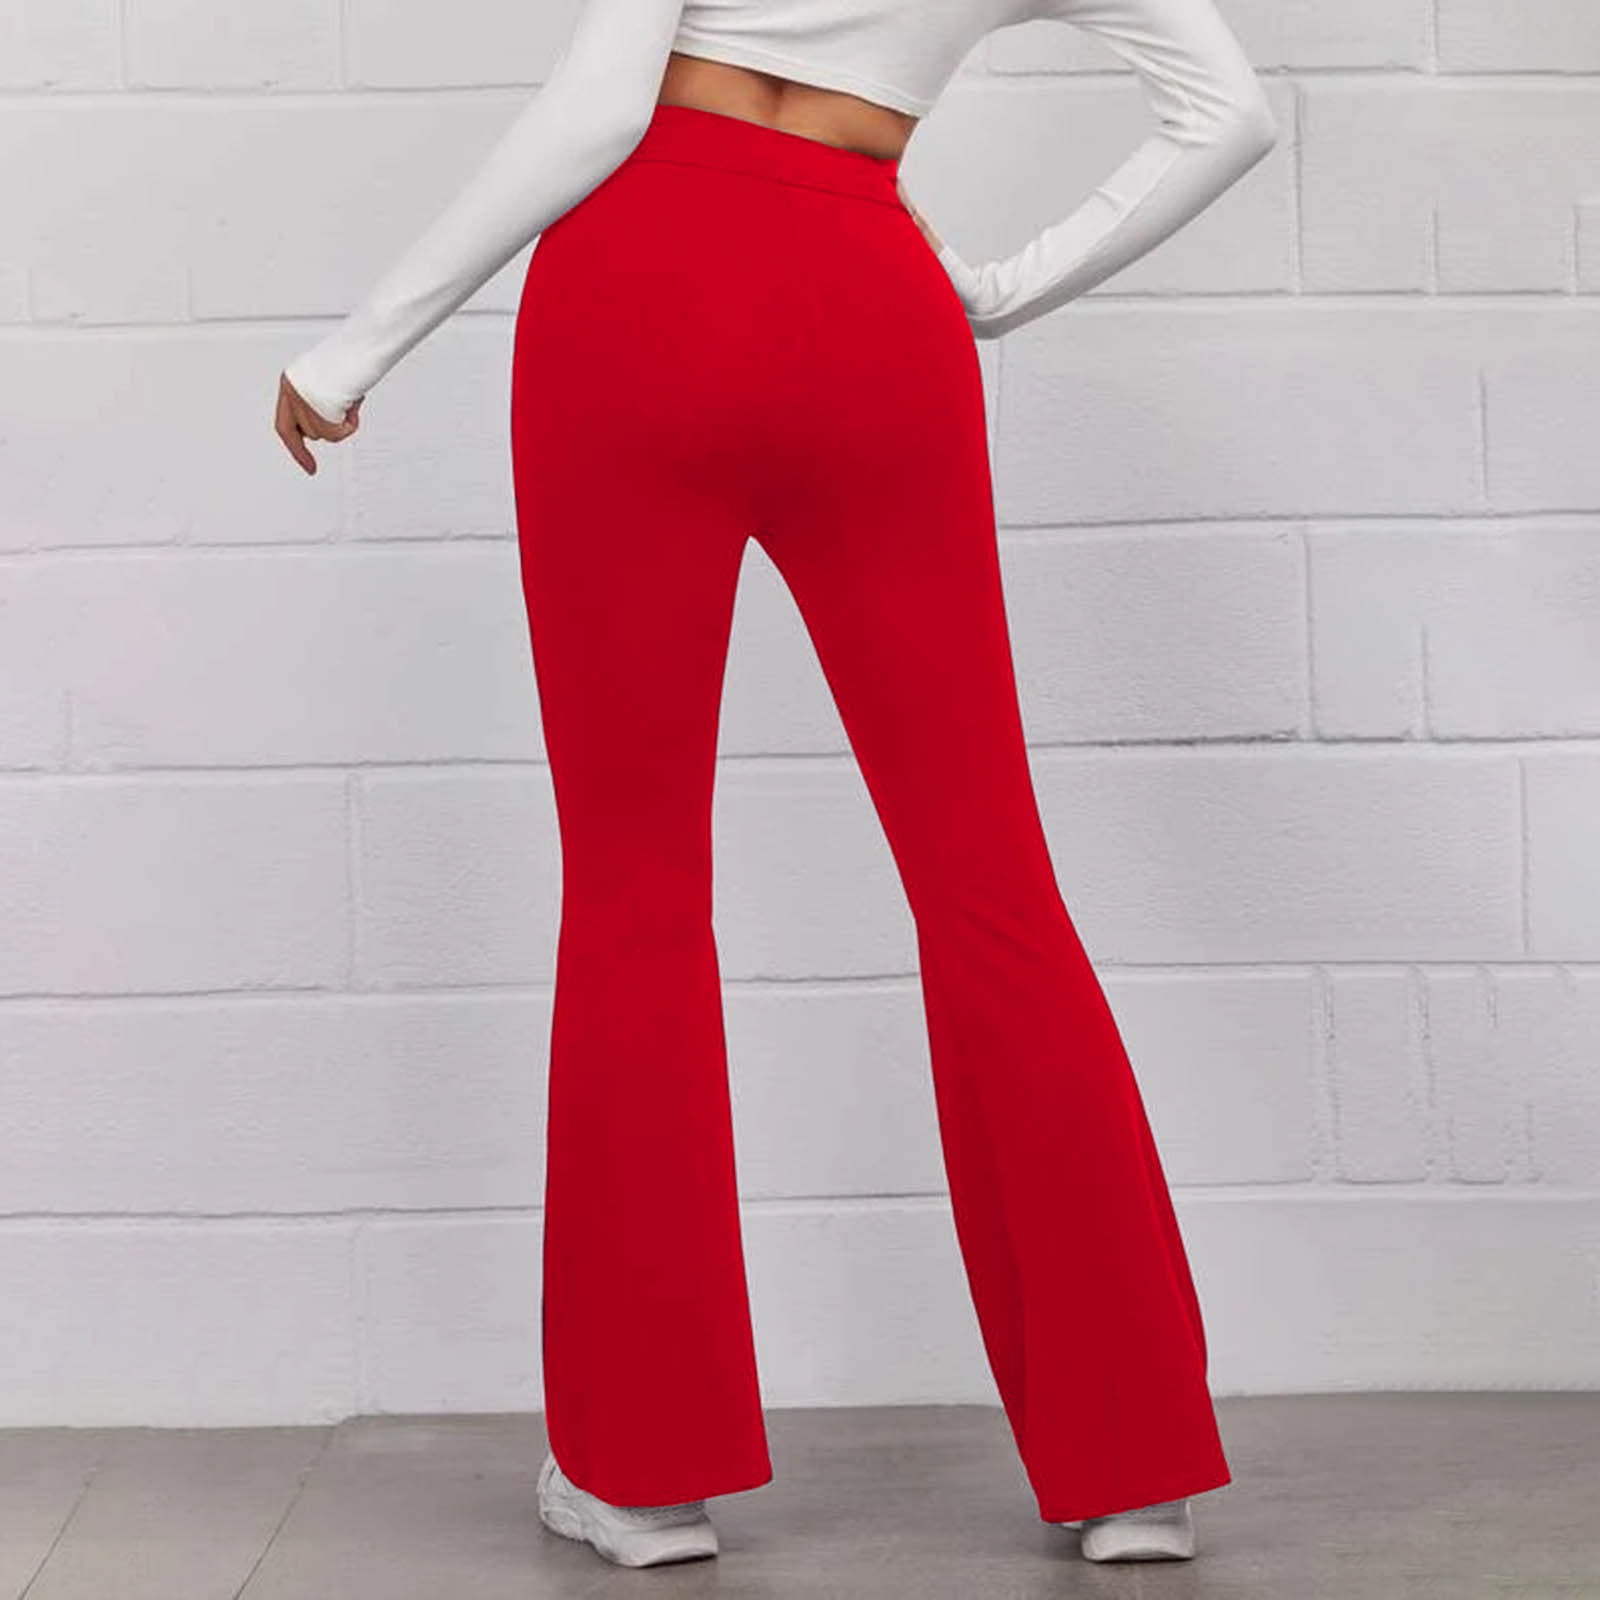 High Rise Flared Beyond Yoga Flare Pants With Waistband Pocket